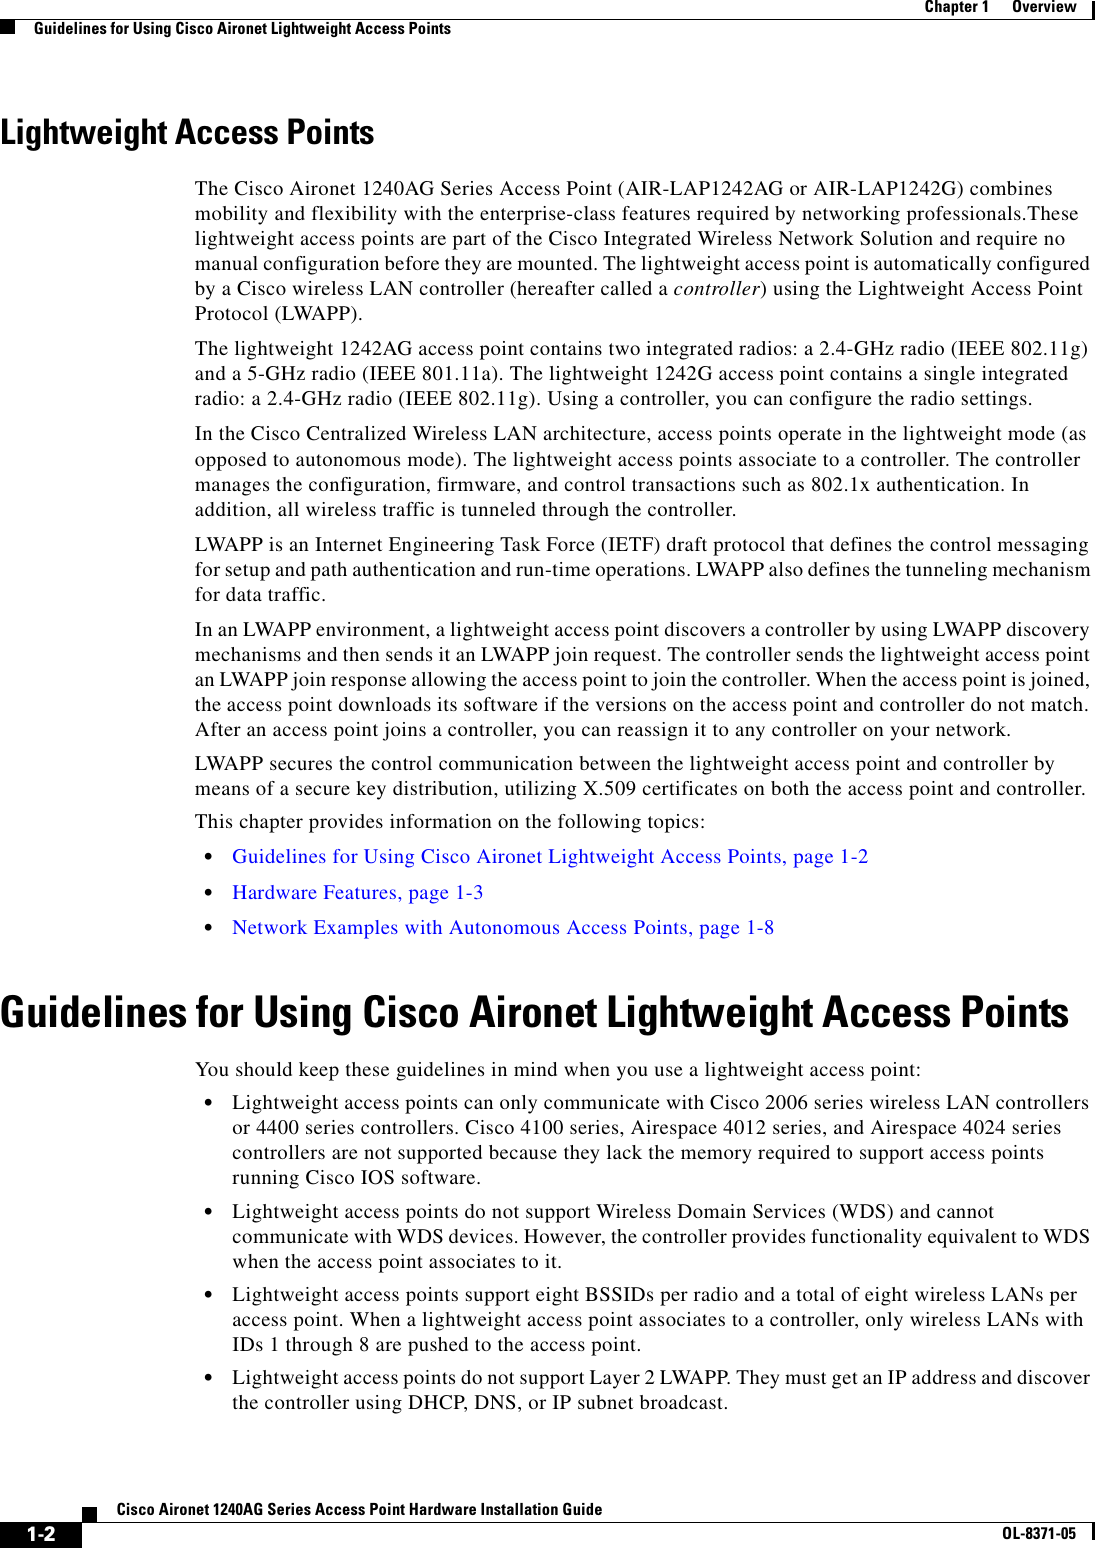  1-2Cisco Aironet 1240AG Series Access Point Hardware Installation GuideOL-8371-05Chapter 1      OverviewGuidelines for Using Cisco Aironet Lightweight Access PointsLightweight Access PointsThe Cisco Aironet 1240AG Series Access Point (AIR-LAP1242AG or AIR-LAP1242G) combines mobility and flexibility with the enterprise-class features required by networking professionals.These lightweight access points are part of the Cisco Integrated Wireless Network Solution and require no manual configuration before they are mounted. The lightweight access point is automatically configured by a Cisco wireless LAN controller (hereafter called a controller) using the Lightweight Access Point Protocol (LWAPP). The lightweight 1242AG access point contains two integrated radios: a 2.4-GHz radio (IEEE 802.11g) and a 5-GHz radio (IEEE 801.11a). The lightweight 1242G access point contains a single integrated radio: a 2.4-GHz radio (IEEE 802.11g). Using a controller, you can configure the radio settings.In the Cisco Centralized Wireless LAN architecture, access points operate in the lightweight mode (as opposed to autonomous mode). The lightweight access points associate to a controller. The controller manages the configuration, firmware, and control transactions such as 802.1x authentication. In addition, all wireless traffic is tunneled through the controller.LWAPP is an Internet Engineering Task Force (IETF) draft protocol that defines the control messaging for setup and path authentication and run-time operations. LWAPP also defines the tunneling mechanism for data traffic.In an LWAPP environment, a lightweight access point discovers a controller by using LWAPP discovery mechanisms and then sends it an LWAPP join request. The controller sends the lightweight access point an LWAPP join response allowing the access point to join the controller. When the access point is joined, the access point downloads its software if the versions on the access point and controller do not match. After an access point joins a controller, you can reassign it to any controller on your network.LWAPP secures the control communication between the lightweight access point and controller by means of a secure key distribution, utilizing X.509 certificates on both the access point and controller.This chapter provides information on the following topics:•Guidelines for Using Cisco Aironet Lightweight Access Points, page 1-2•Hardware Features, page 1-3•Network Examples with Autonomous Access Points, page 1-8Guidelines for Using Cisco Aironet Lightweight Access PointsYou should keep these guidelines in mind when you use a lightweight access point:•Lightweight access points can only communicate with Cisco 2006 series wireless LAN controllers or 4400 series controllers. Cisco 4100 series, Airespace 4012 series, and Airespace 4024 series controllers are not supported because they lack the memory required to support access points running Cisco IOS software. •Lightweight access points do not support Wireless Domain Services (WDS) and cannot communicate with WDS devices. However, the controller provides functionality equivalent to WDS when the access point associates to it.•Lightweight access points support eight BSSIDs per radio and a total of eight wireless LANs per access point. When a lightweight access point associates to a controller, only wireless LANs with IDs 1 through 8 are pushed to the access point.•Lightweight access points do not support Layer 2 LWAPP. They must get an IP address and discover the controller using DHCP, DNS, or IP subnet broadcast.